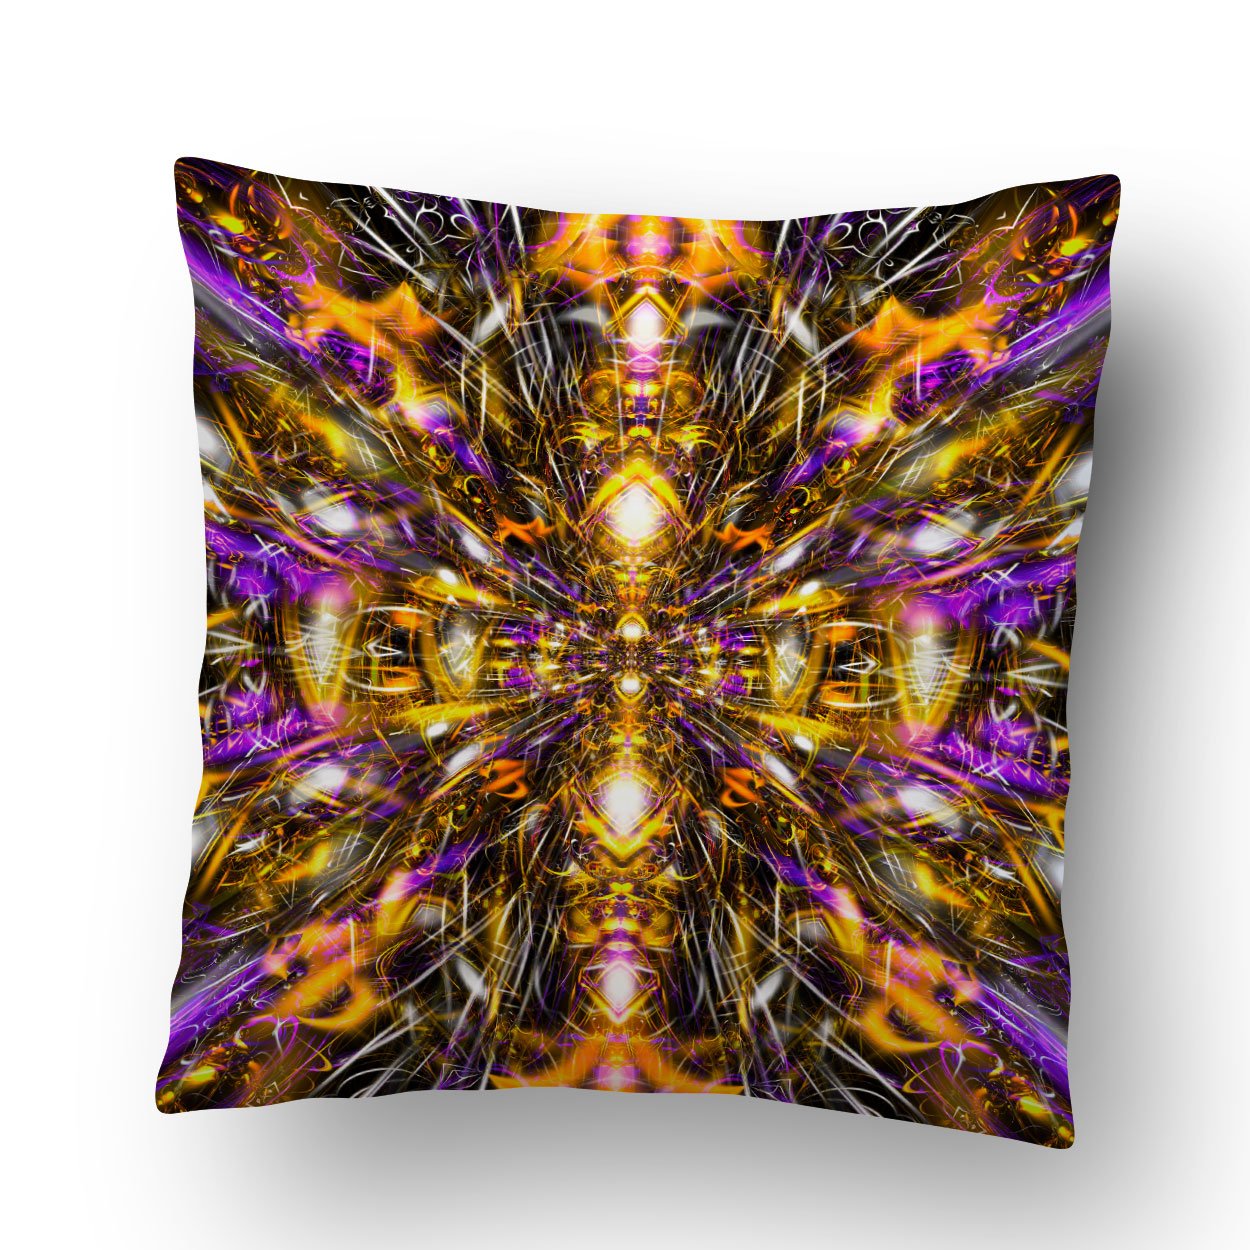 Diamonds and Thunderbolts Throw Pillow Cover